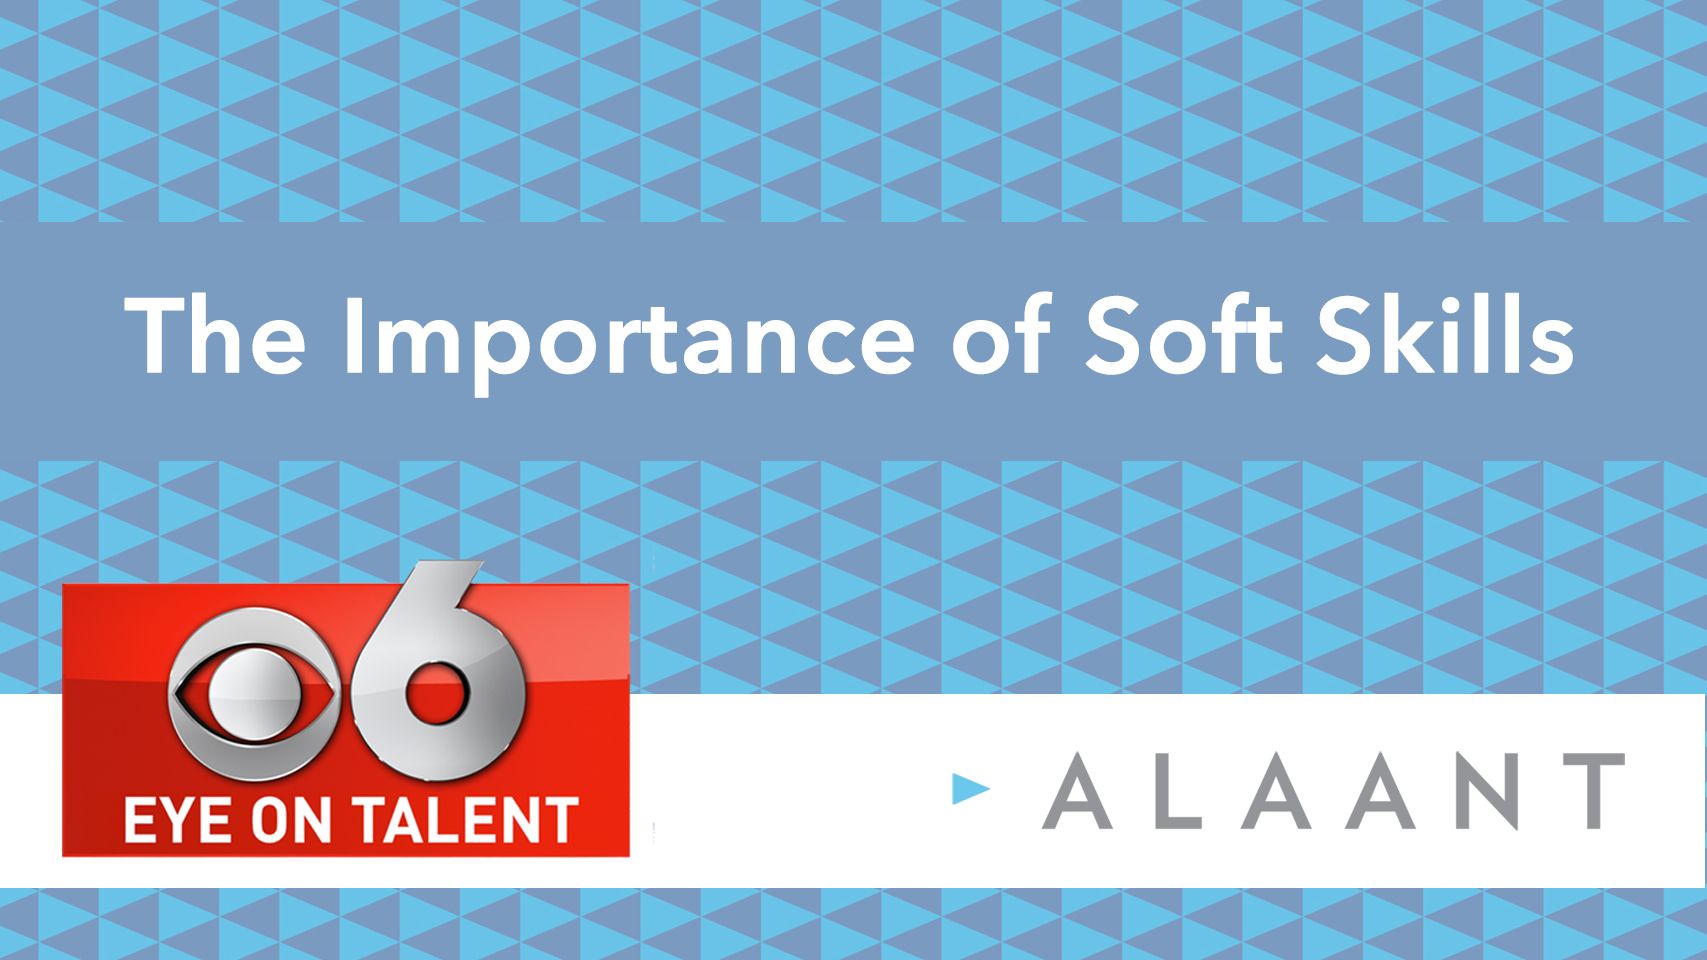 Alaant Eye on Talent: The Importance of Soft Skills